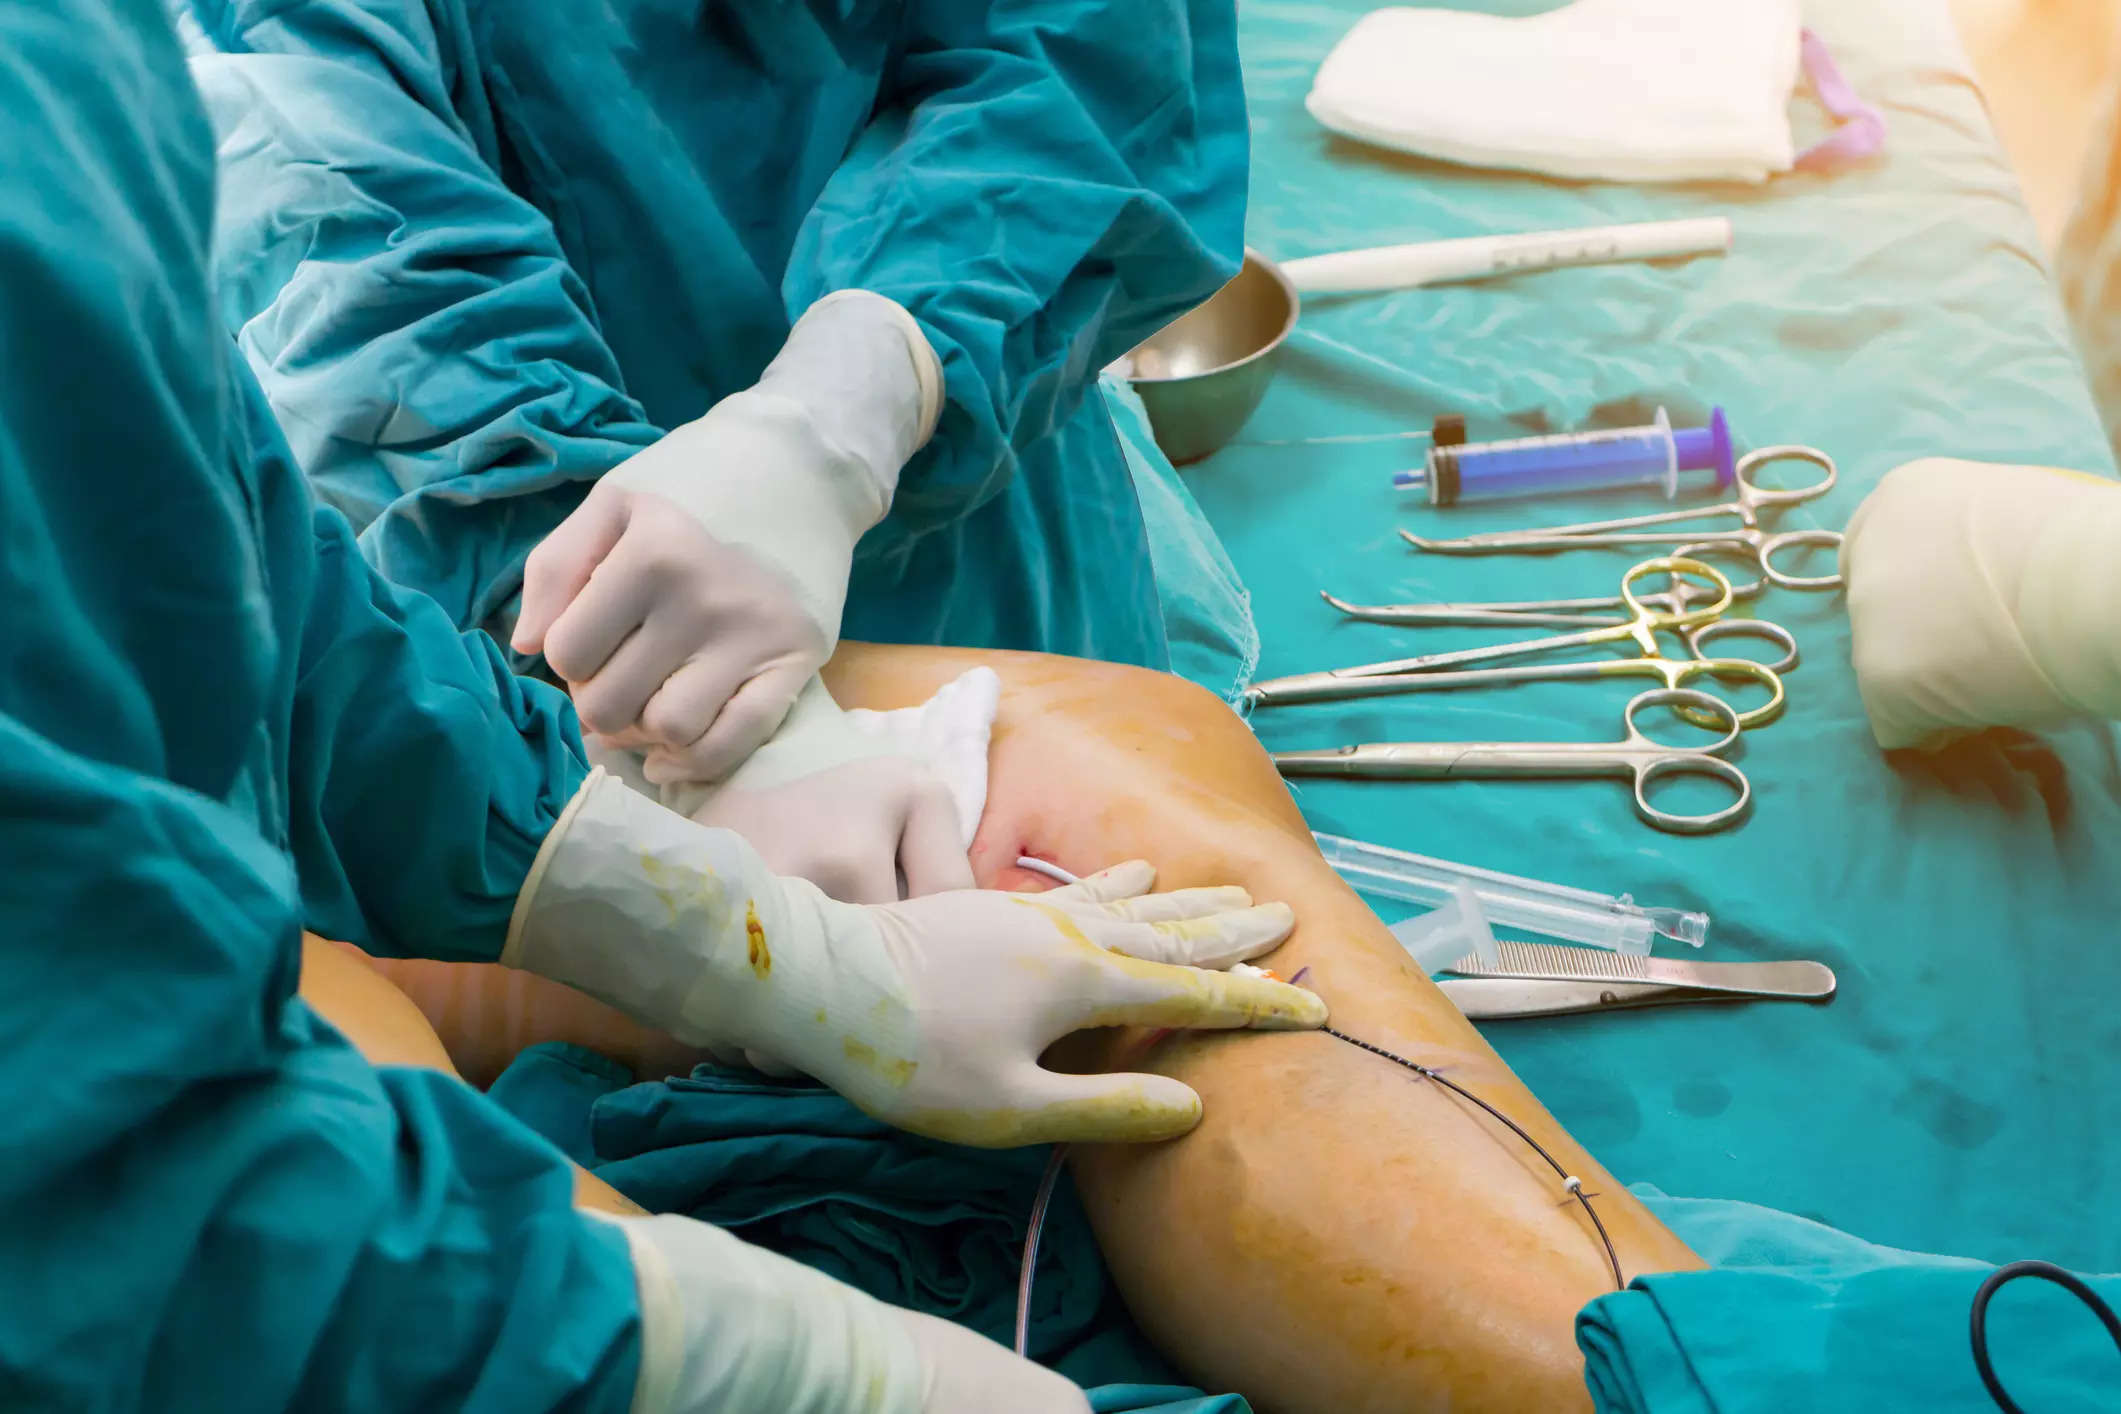 Limb lengthening surgery is a strange and complicated procedure that uses the body's ability to regenerate new bone, ligaments, blood vessels, soft tissue and nerves to support and surround the new structure